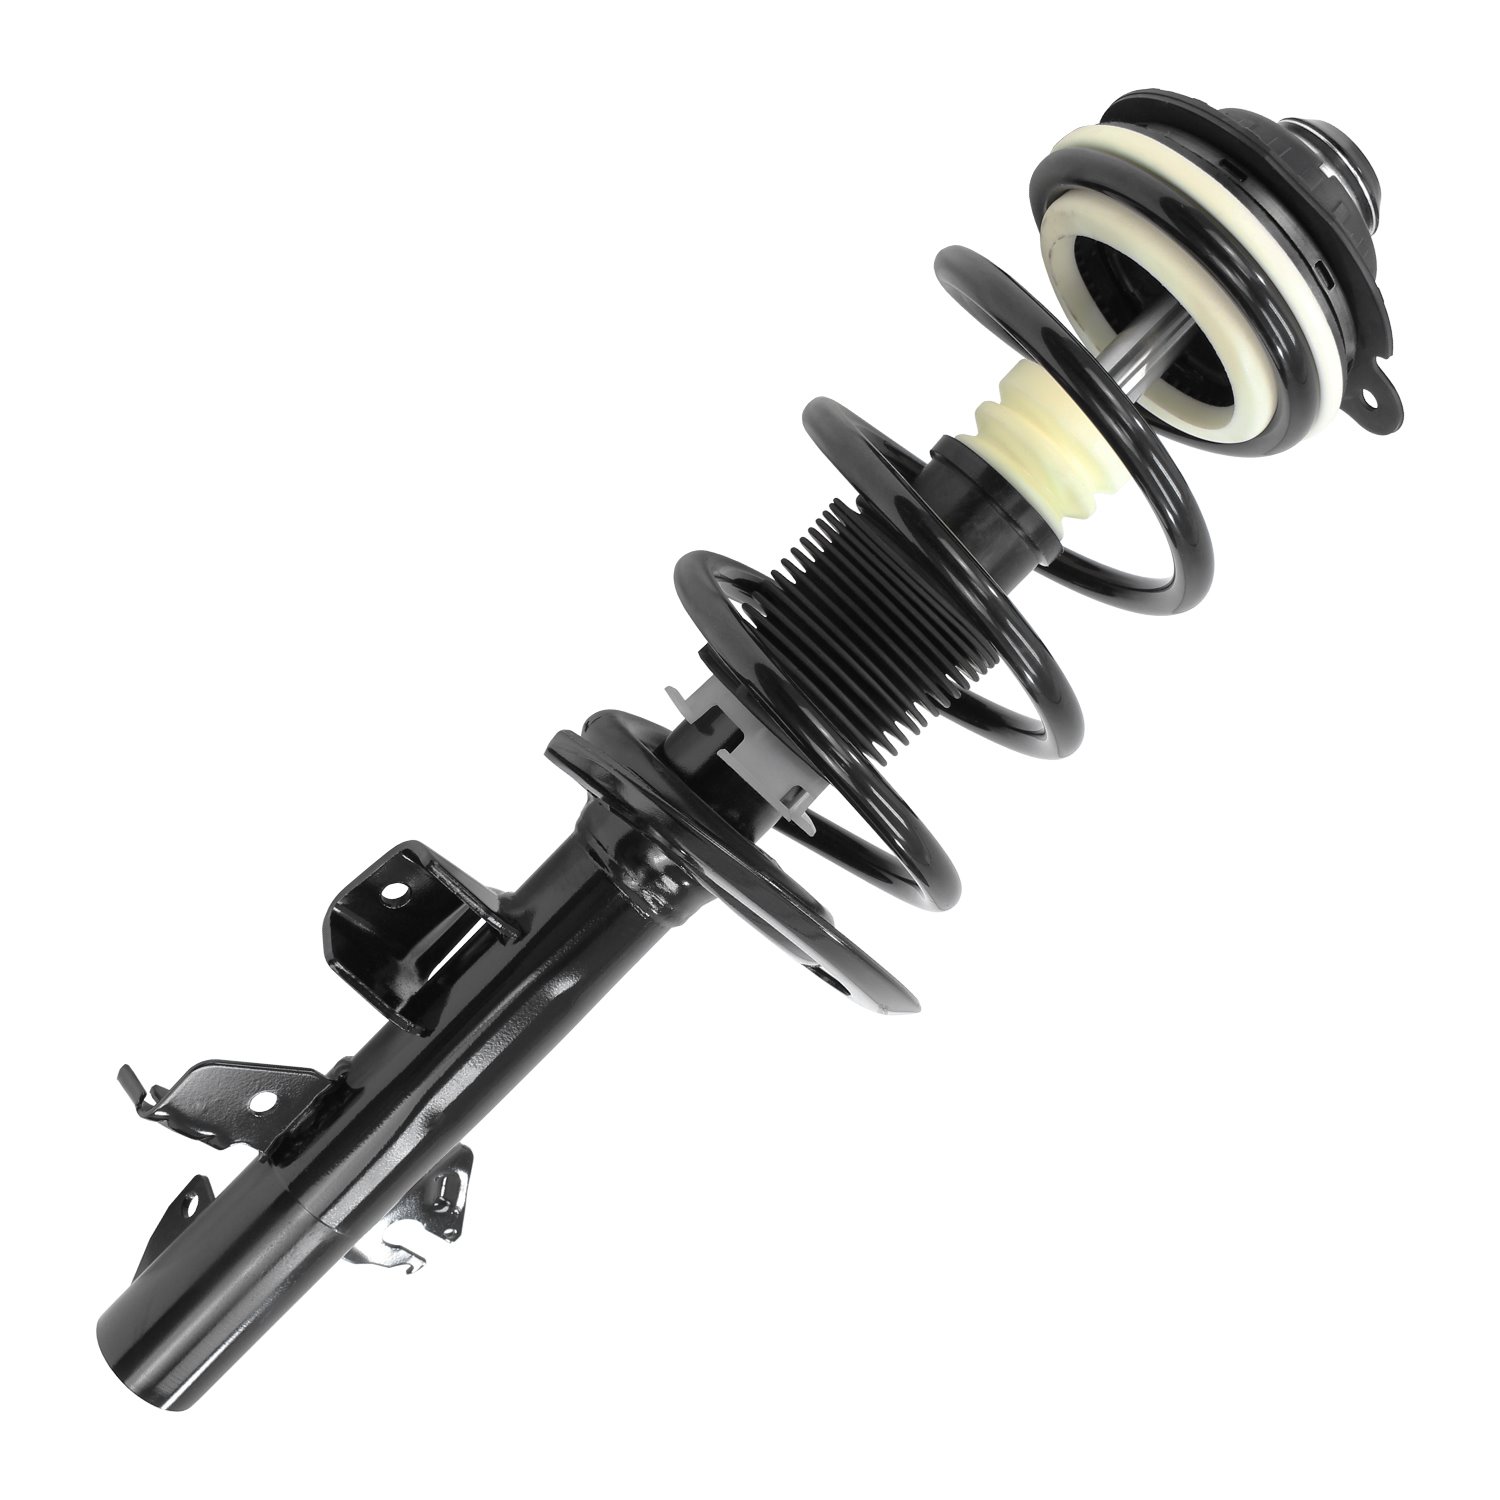 13612 Front Suspension Strut & Coil Spring Assemby Fits Select Jeep Cherokee